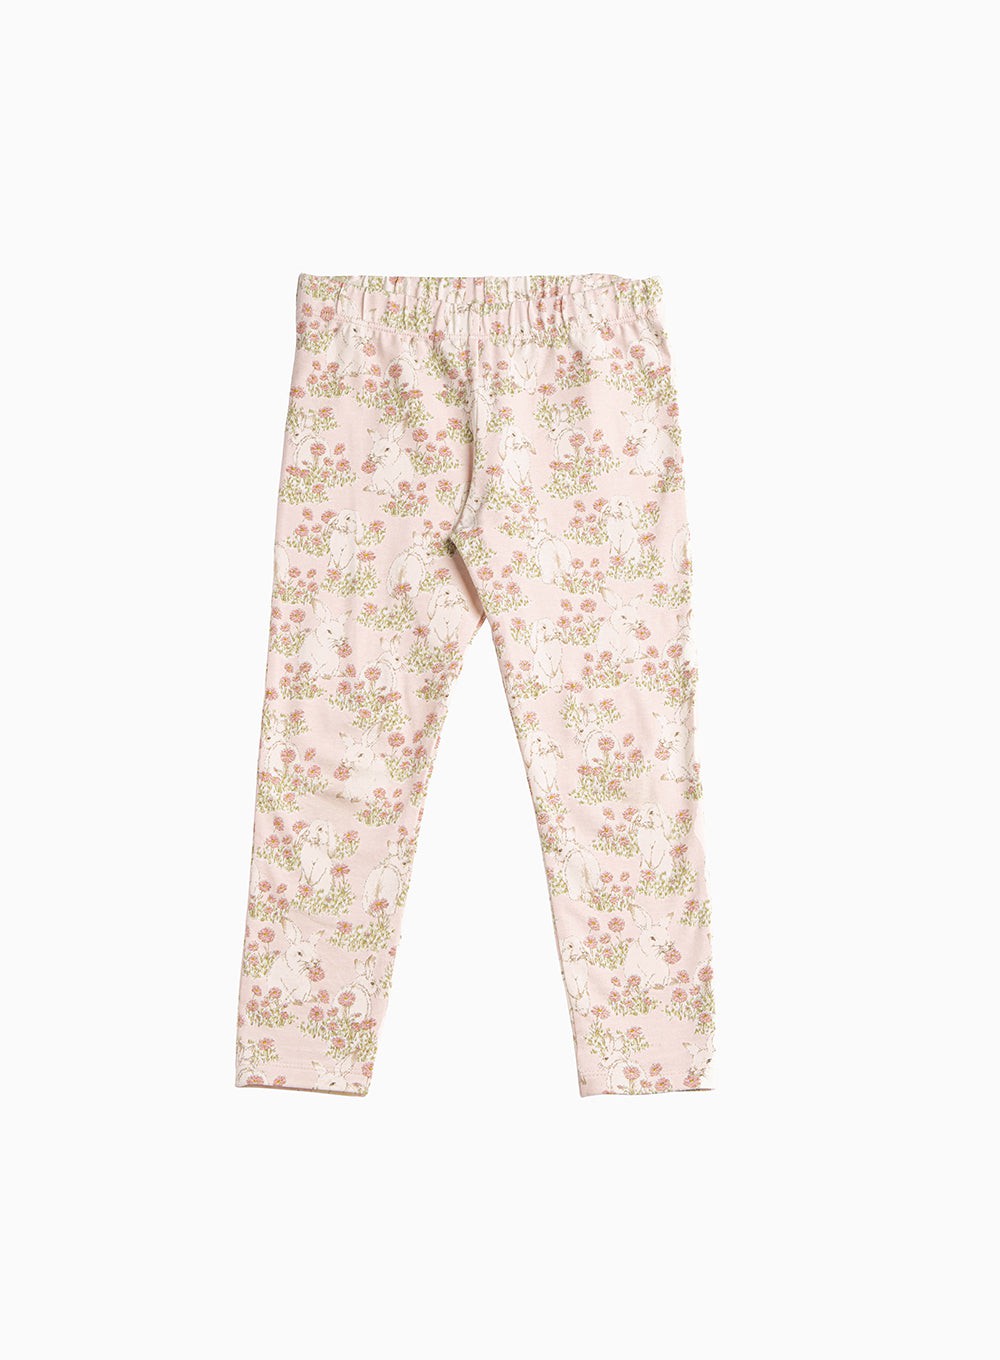 Confiture Fluffy Bunny Leggings in Pink